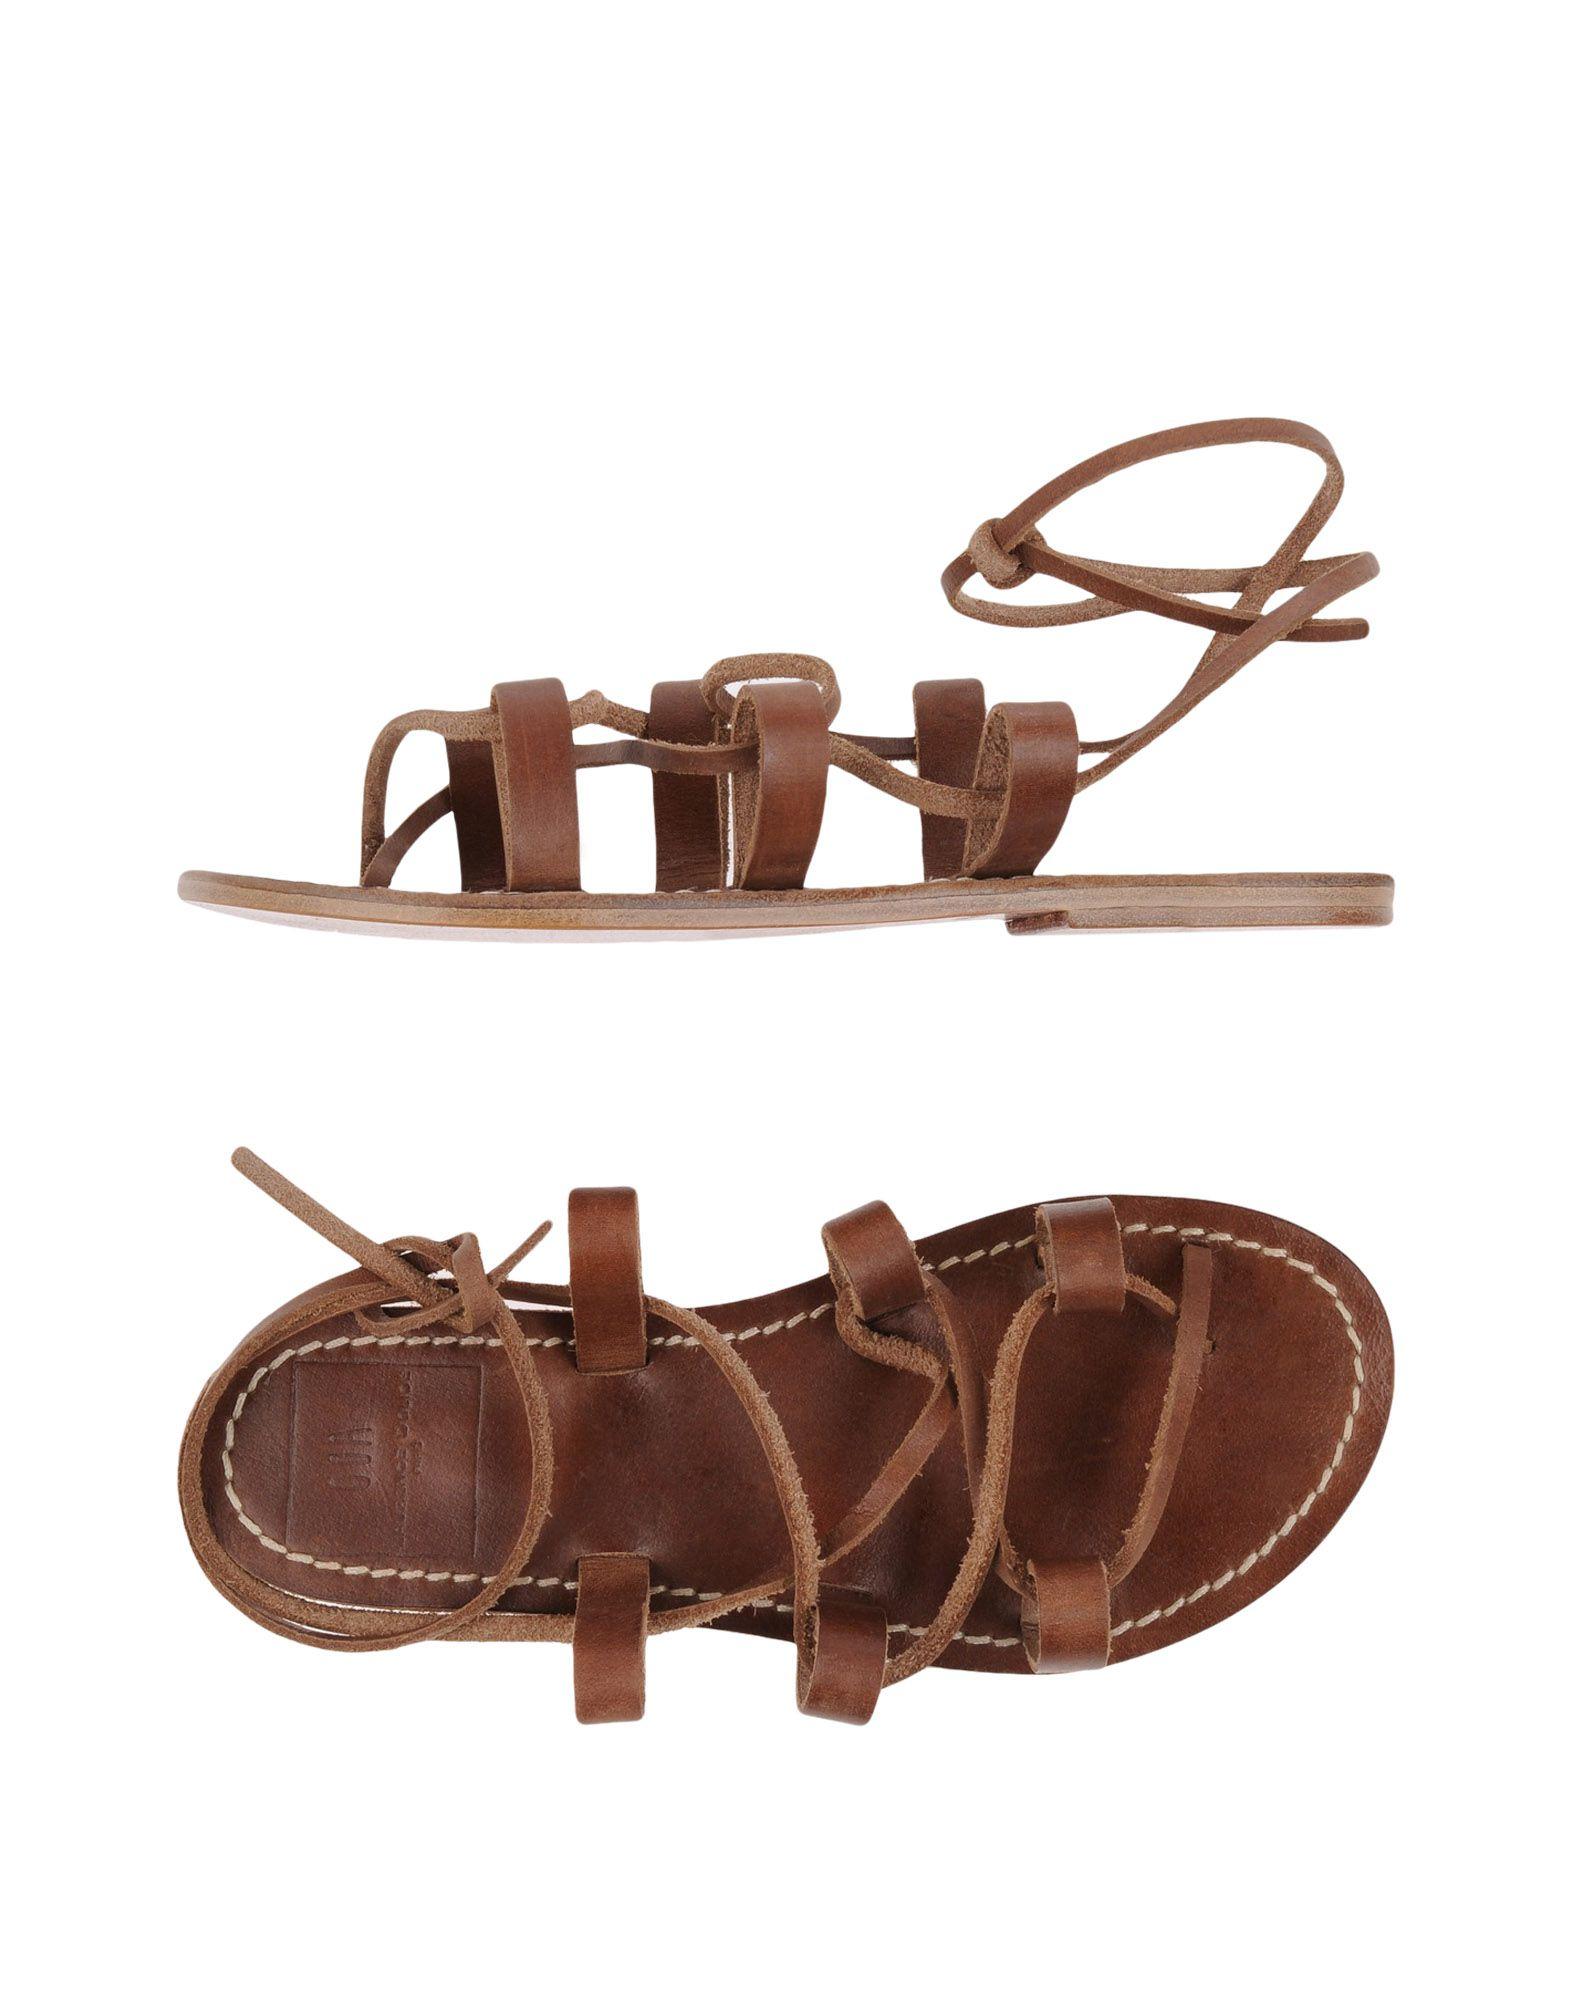 Lyst - Laurence Doligé Toe Post Sandal in Brown